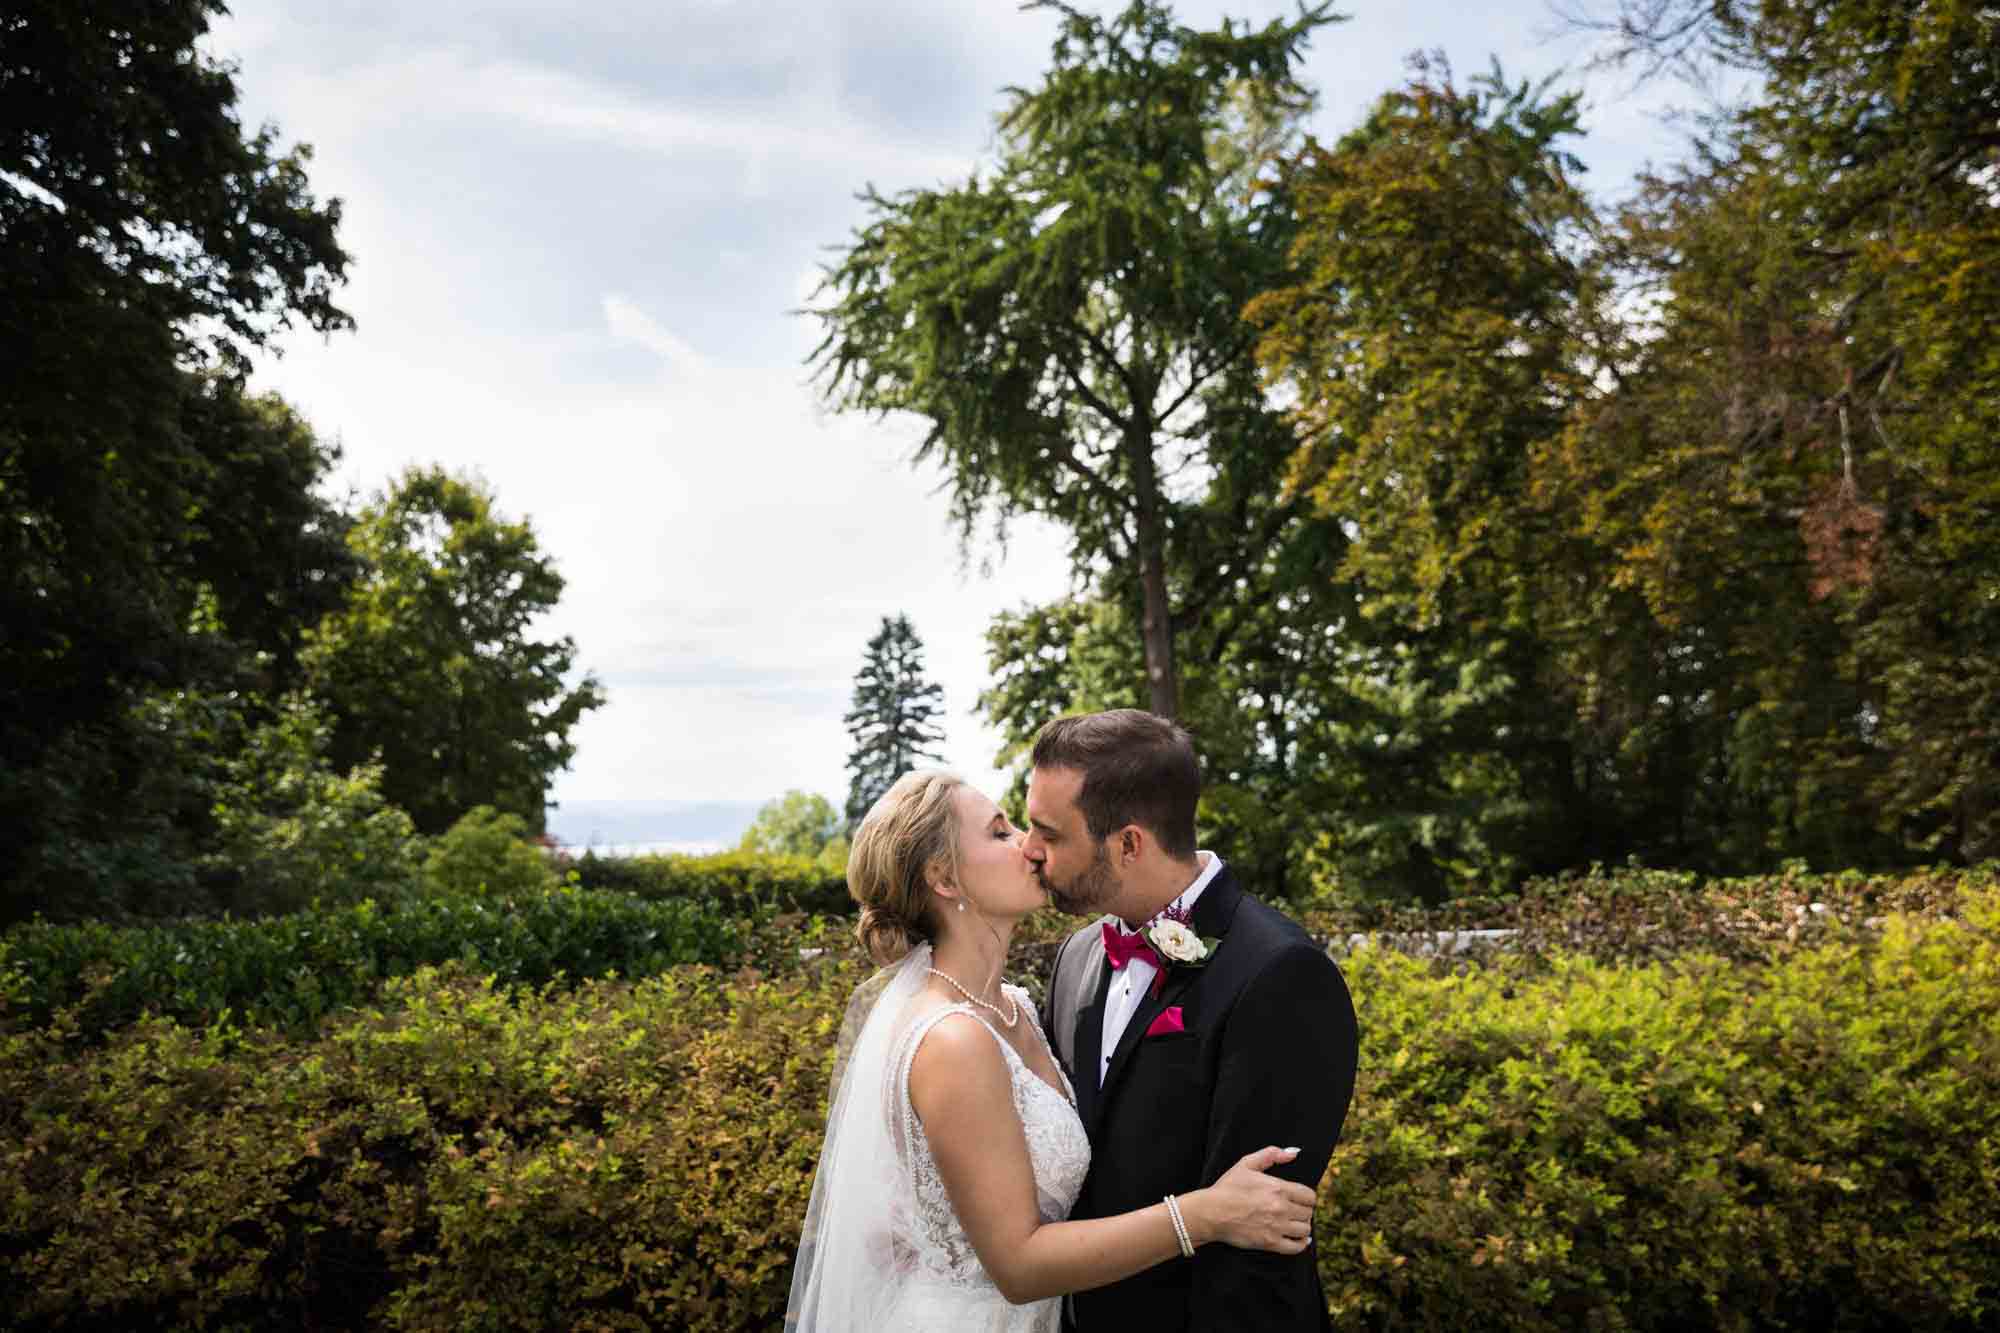 Bride and groom kissing in front of hedge and trees at a Briarcliff Manor wedding